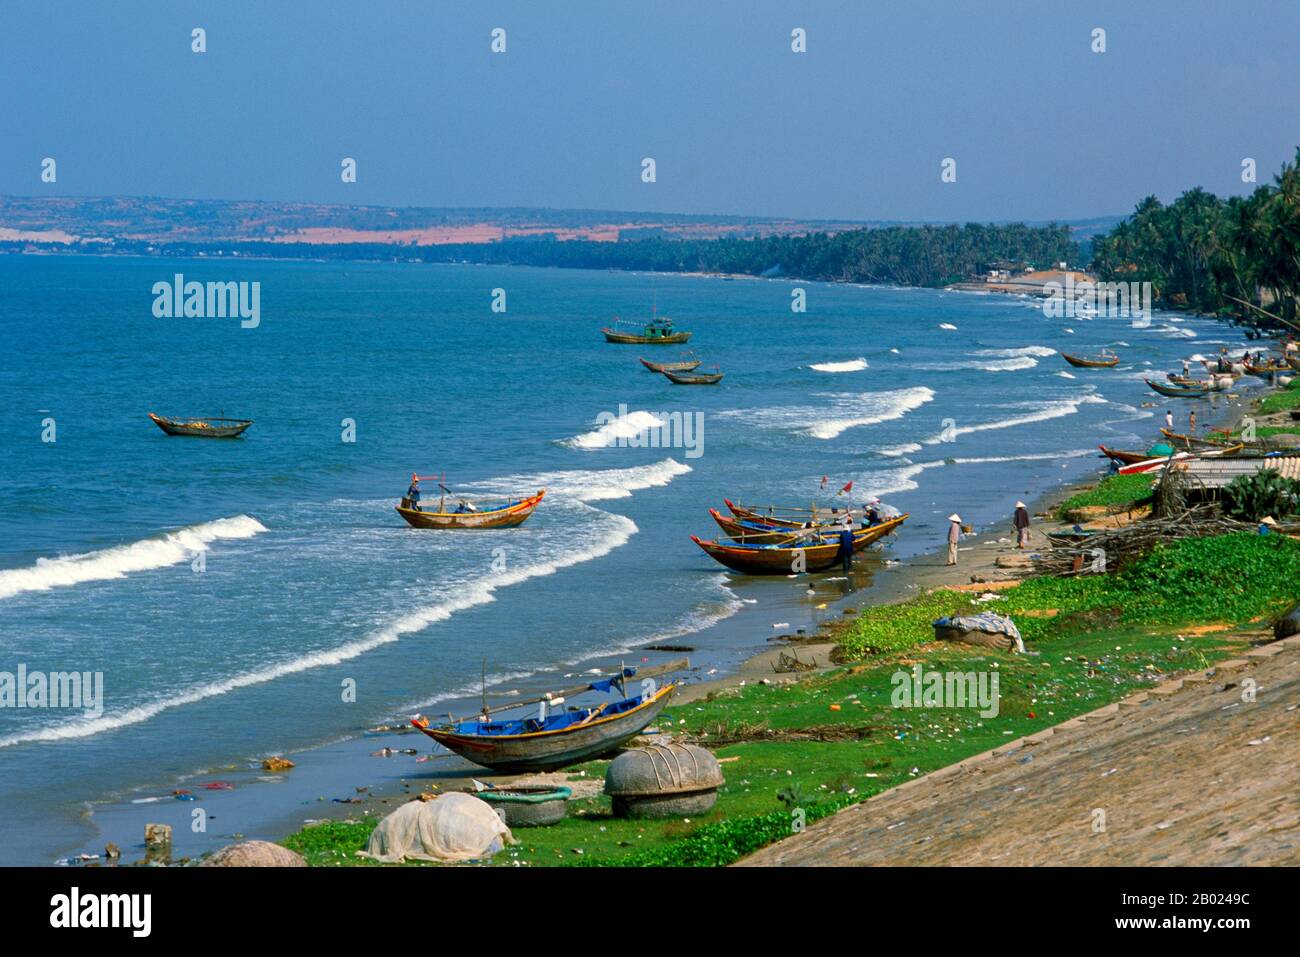 Mui Ne is famous for its production of nuoc mam (Vietnamese fish sauce). Large jars full of the sauce can be seen along the coast around Mui Ne. The sauce is left to ferment in the sun for a number of months. Stock Photo